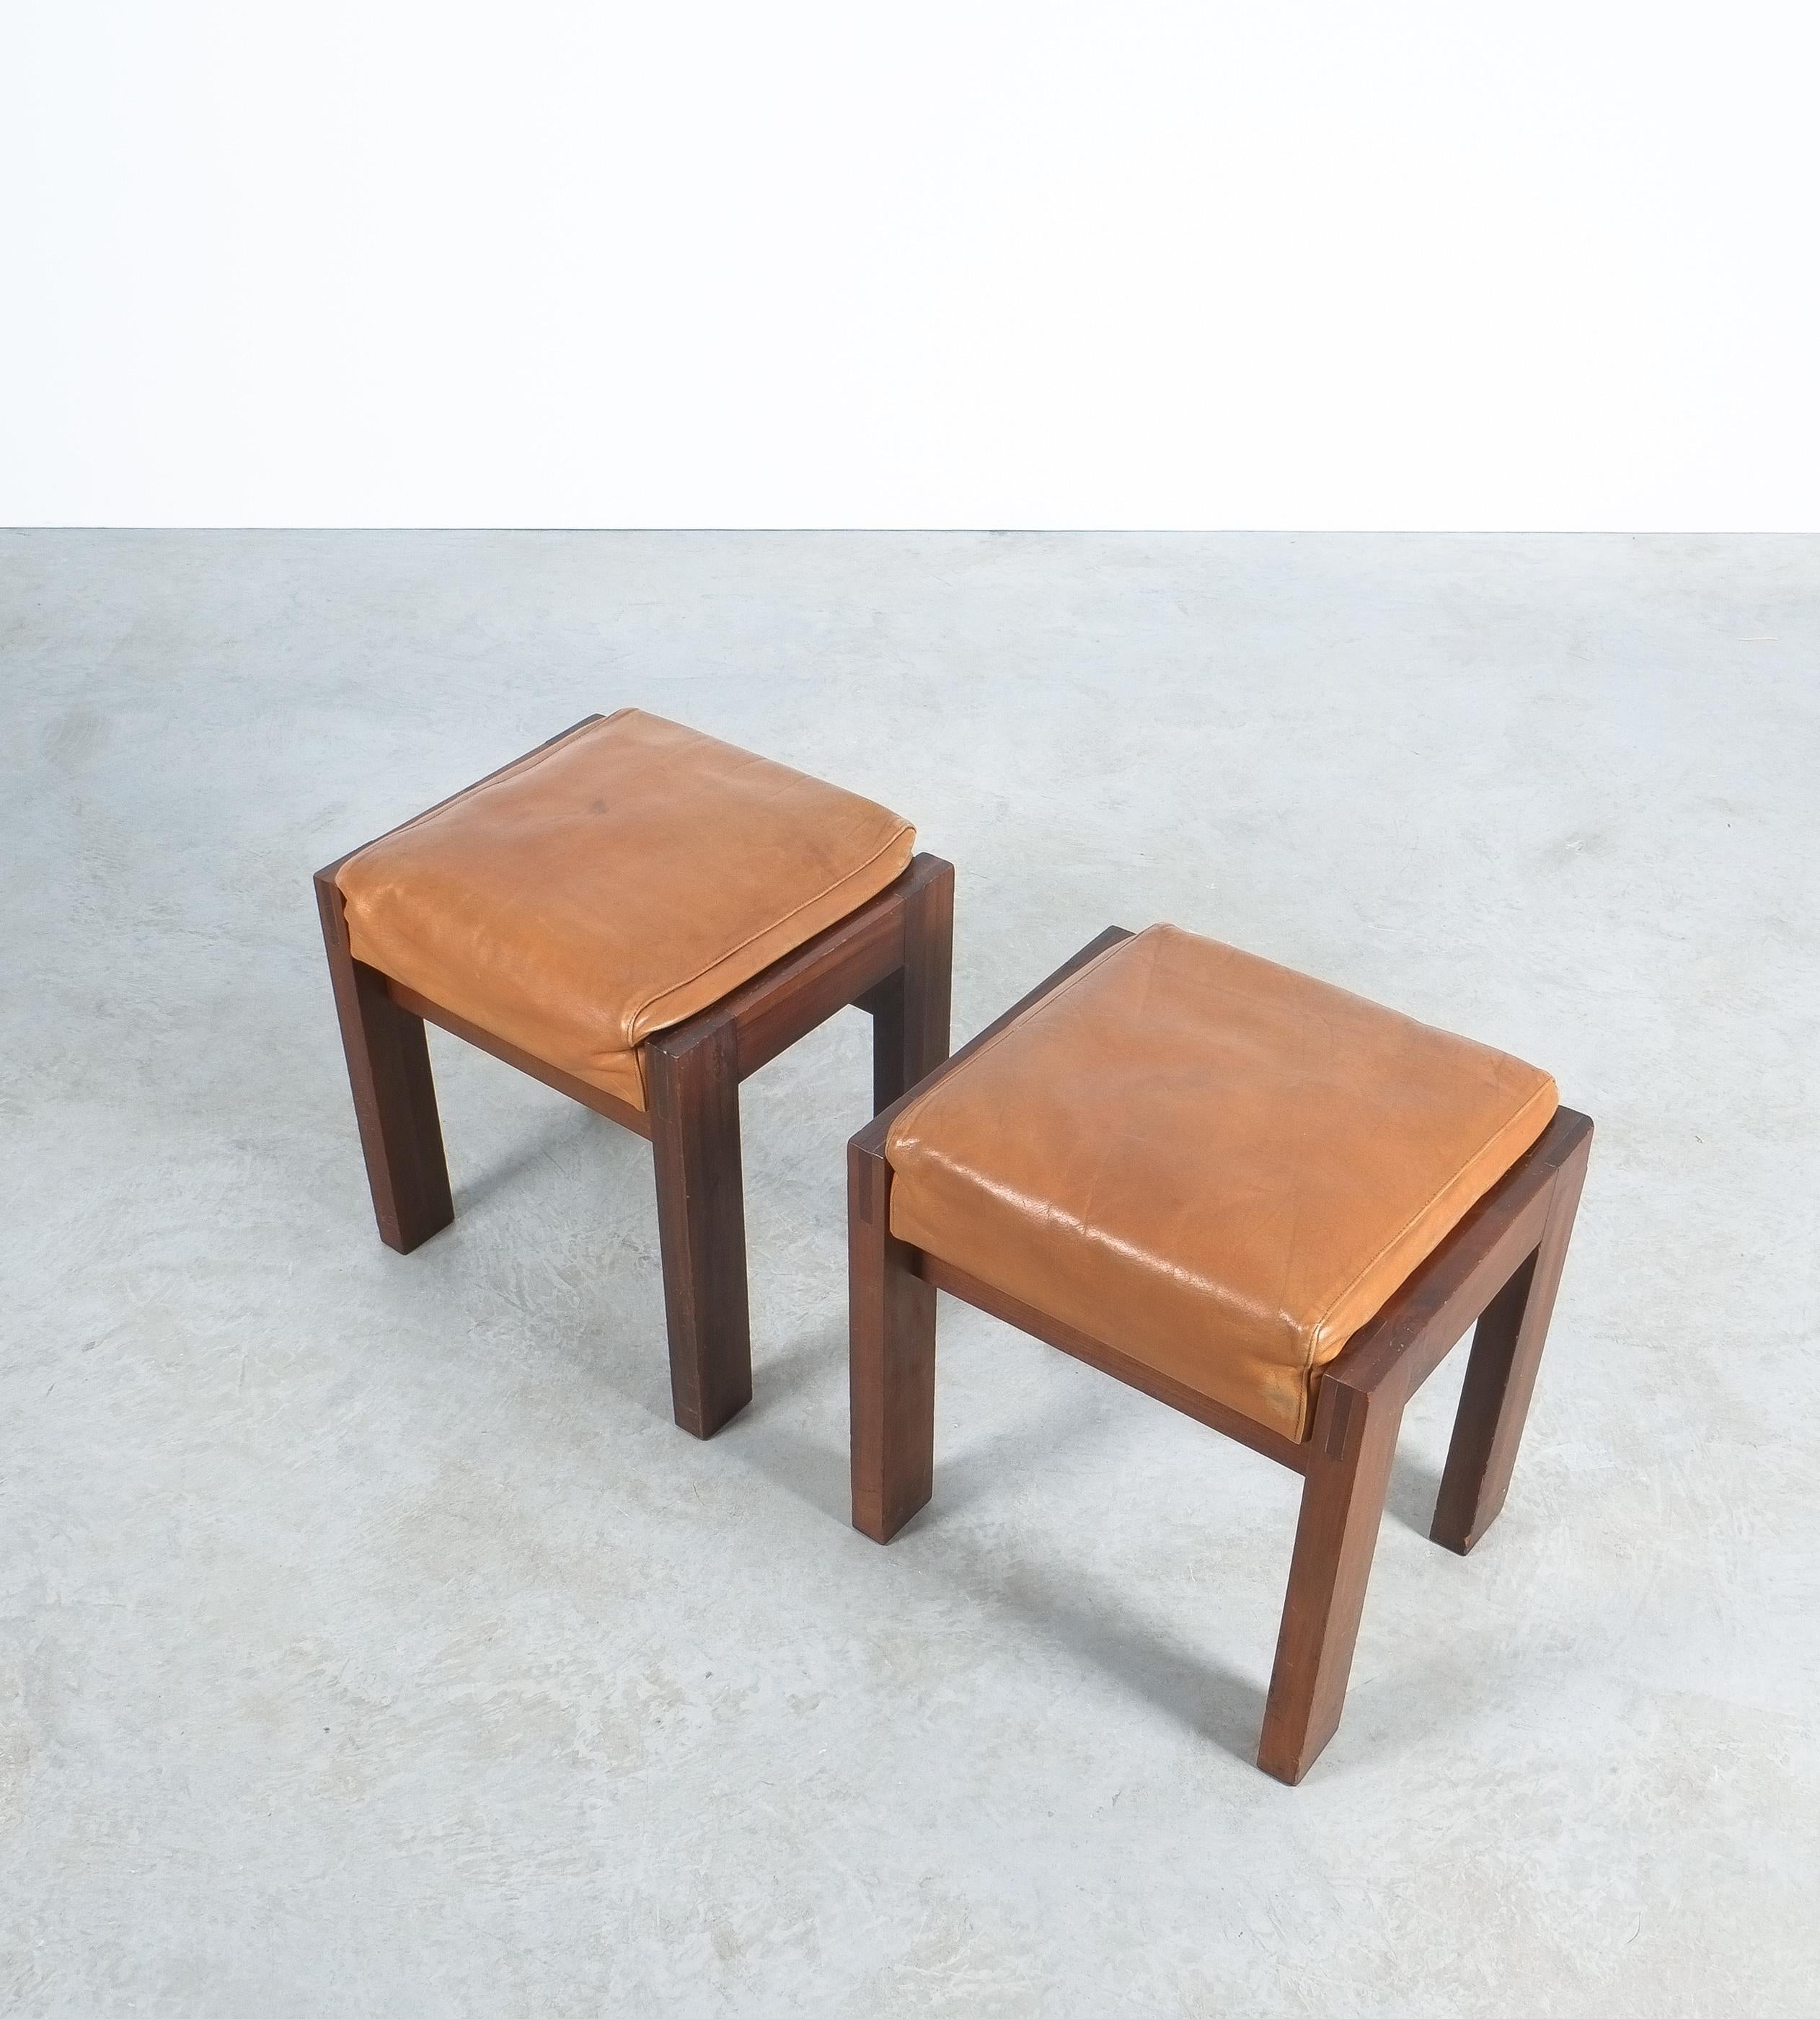 Maple and Leather Midcentury Wood Stools, Italy, 1950 In Good Condition For Sale In Vienna, AT